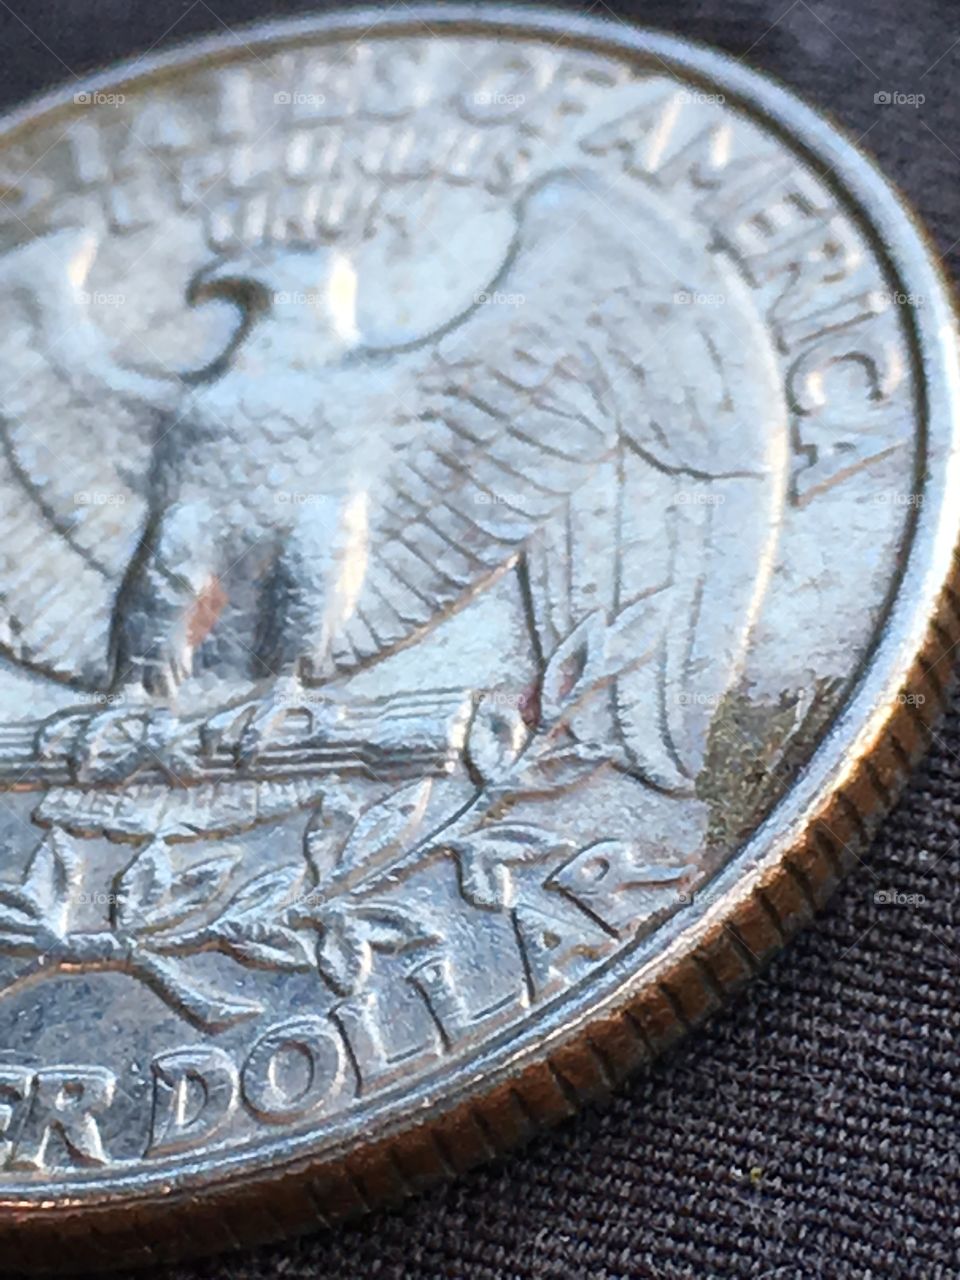 Such detail engraved in the US quarter.